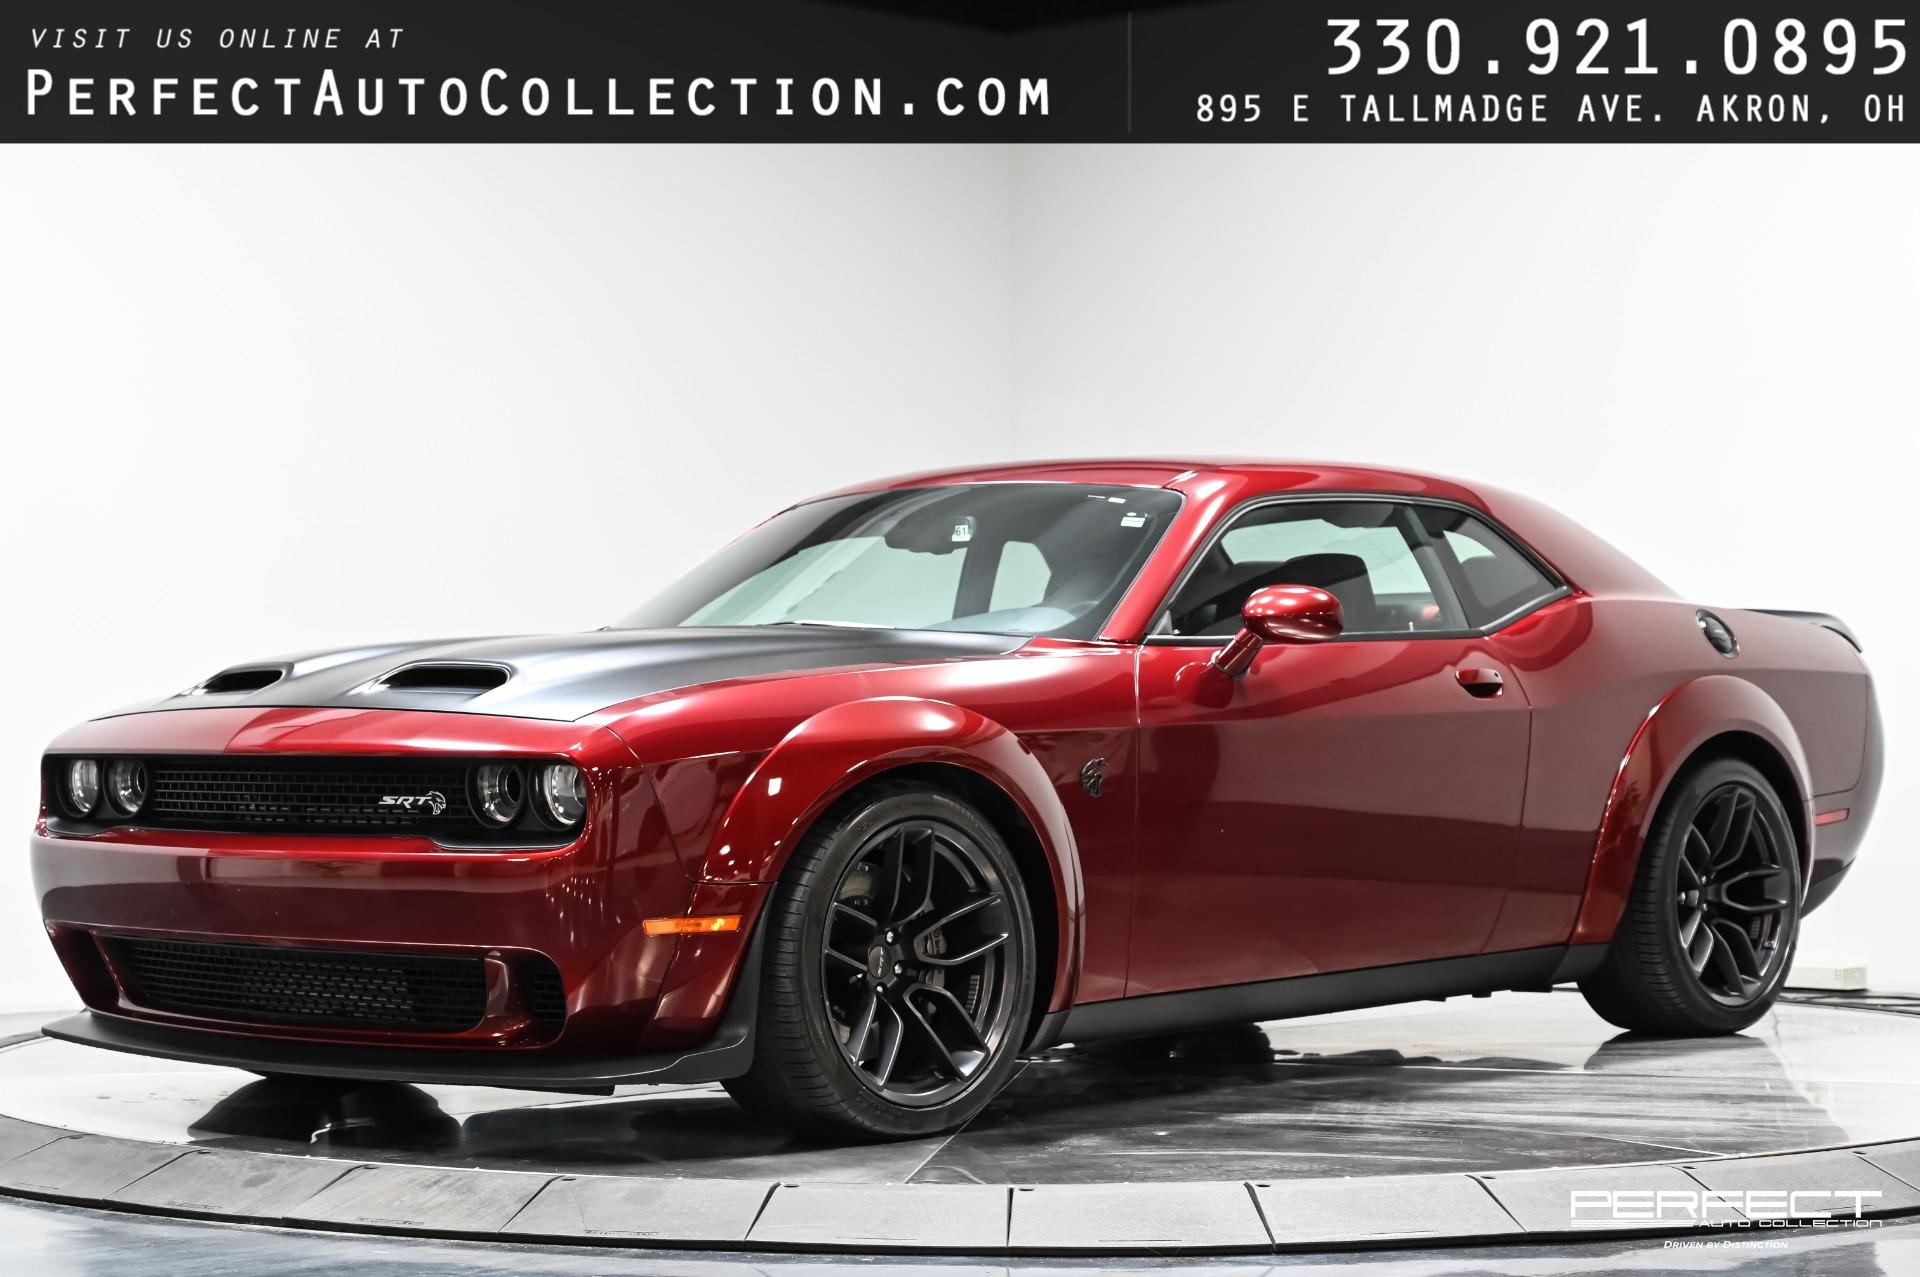 Used 2019 Dodge Challenger Srt Hellcat Redeye Widebody For Sale Sold Perfect Auto Collection